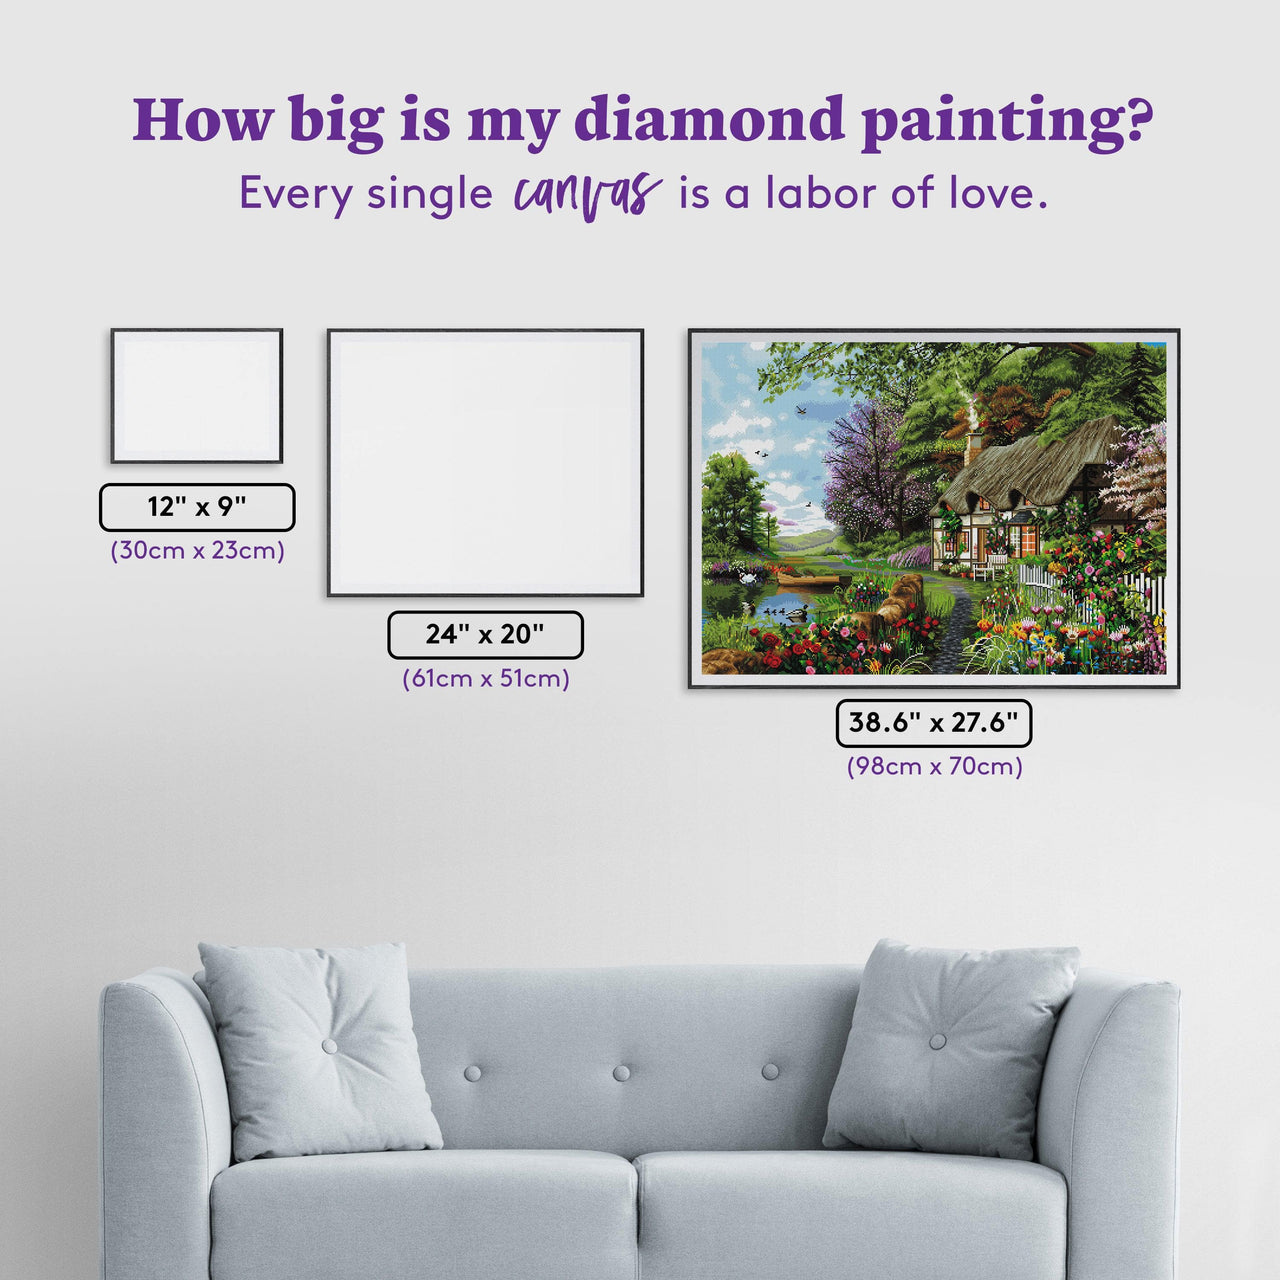 Diamond Painting Countryside Cottage 38.6" x 27.6" (98cm x 70cm) / Square with 68 Colors including 6 ABs / 110,433